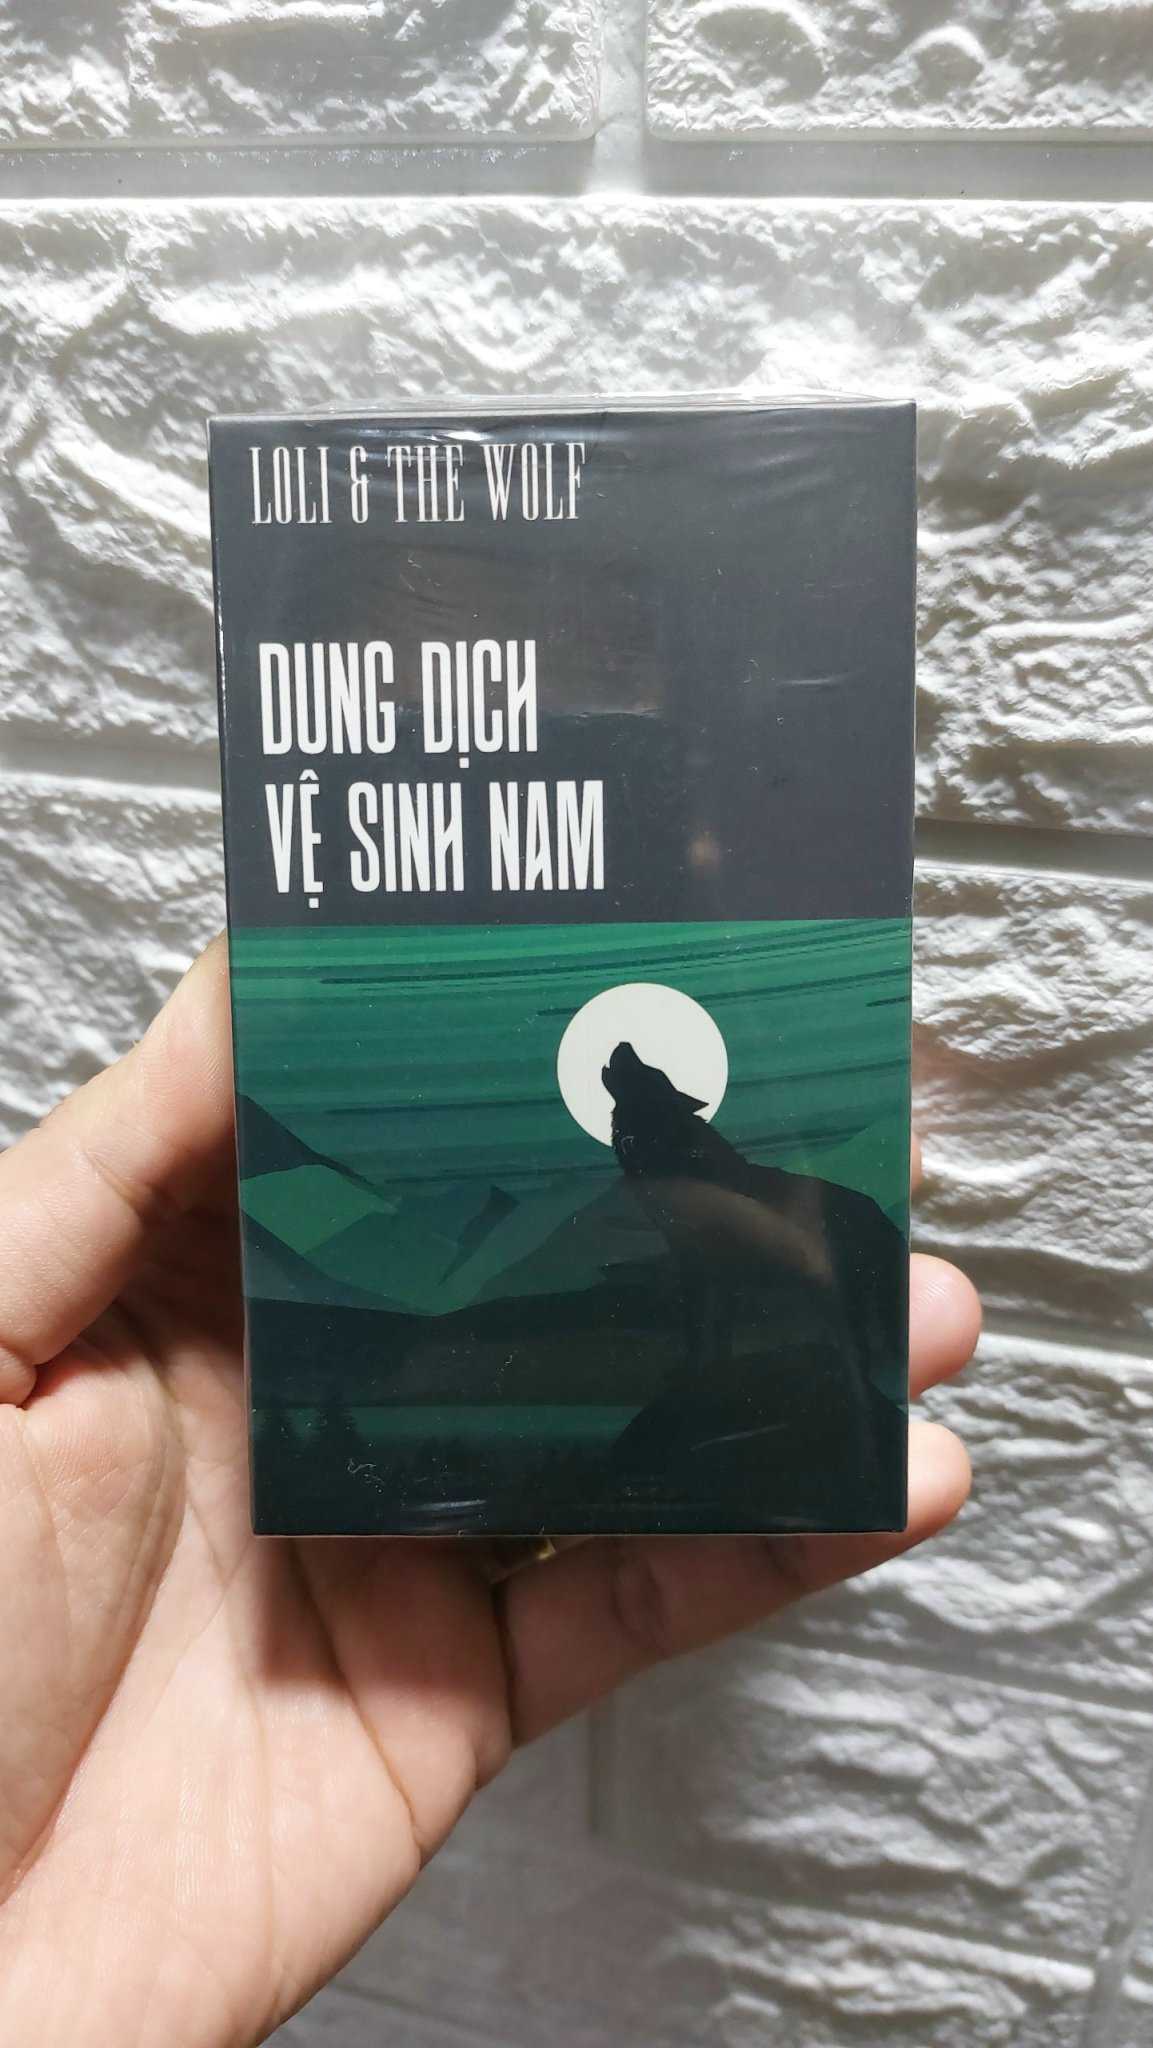 Dung dich ve sinh nam LOLI THE WOLF-shopthanhtung